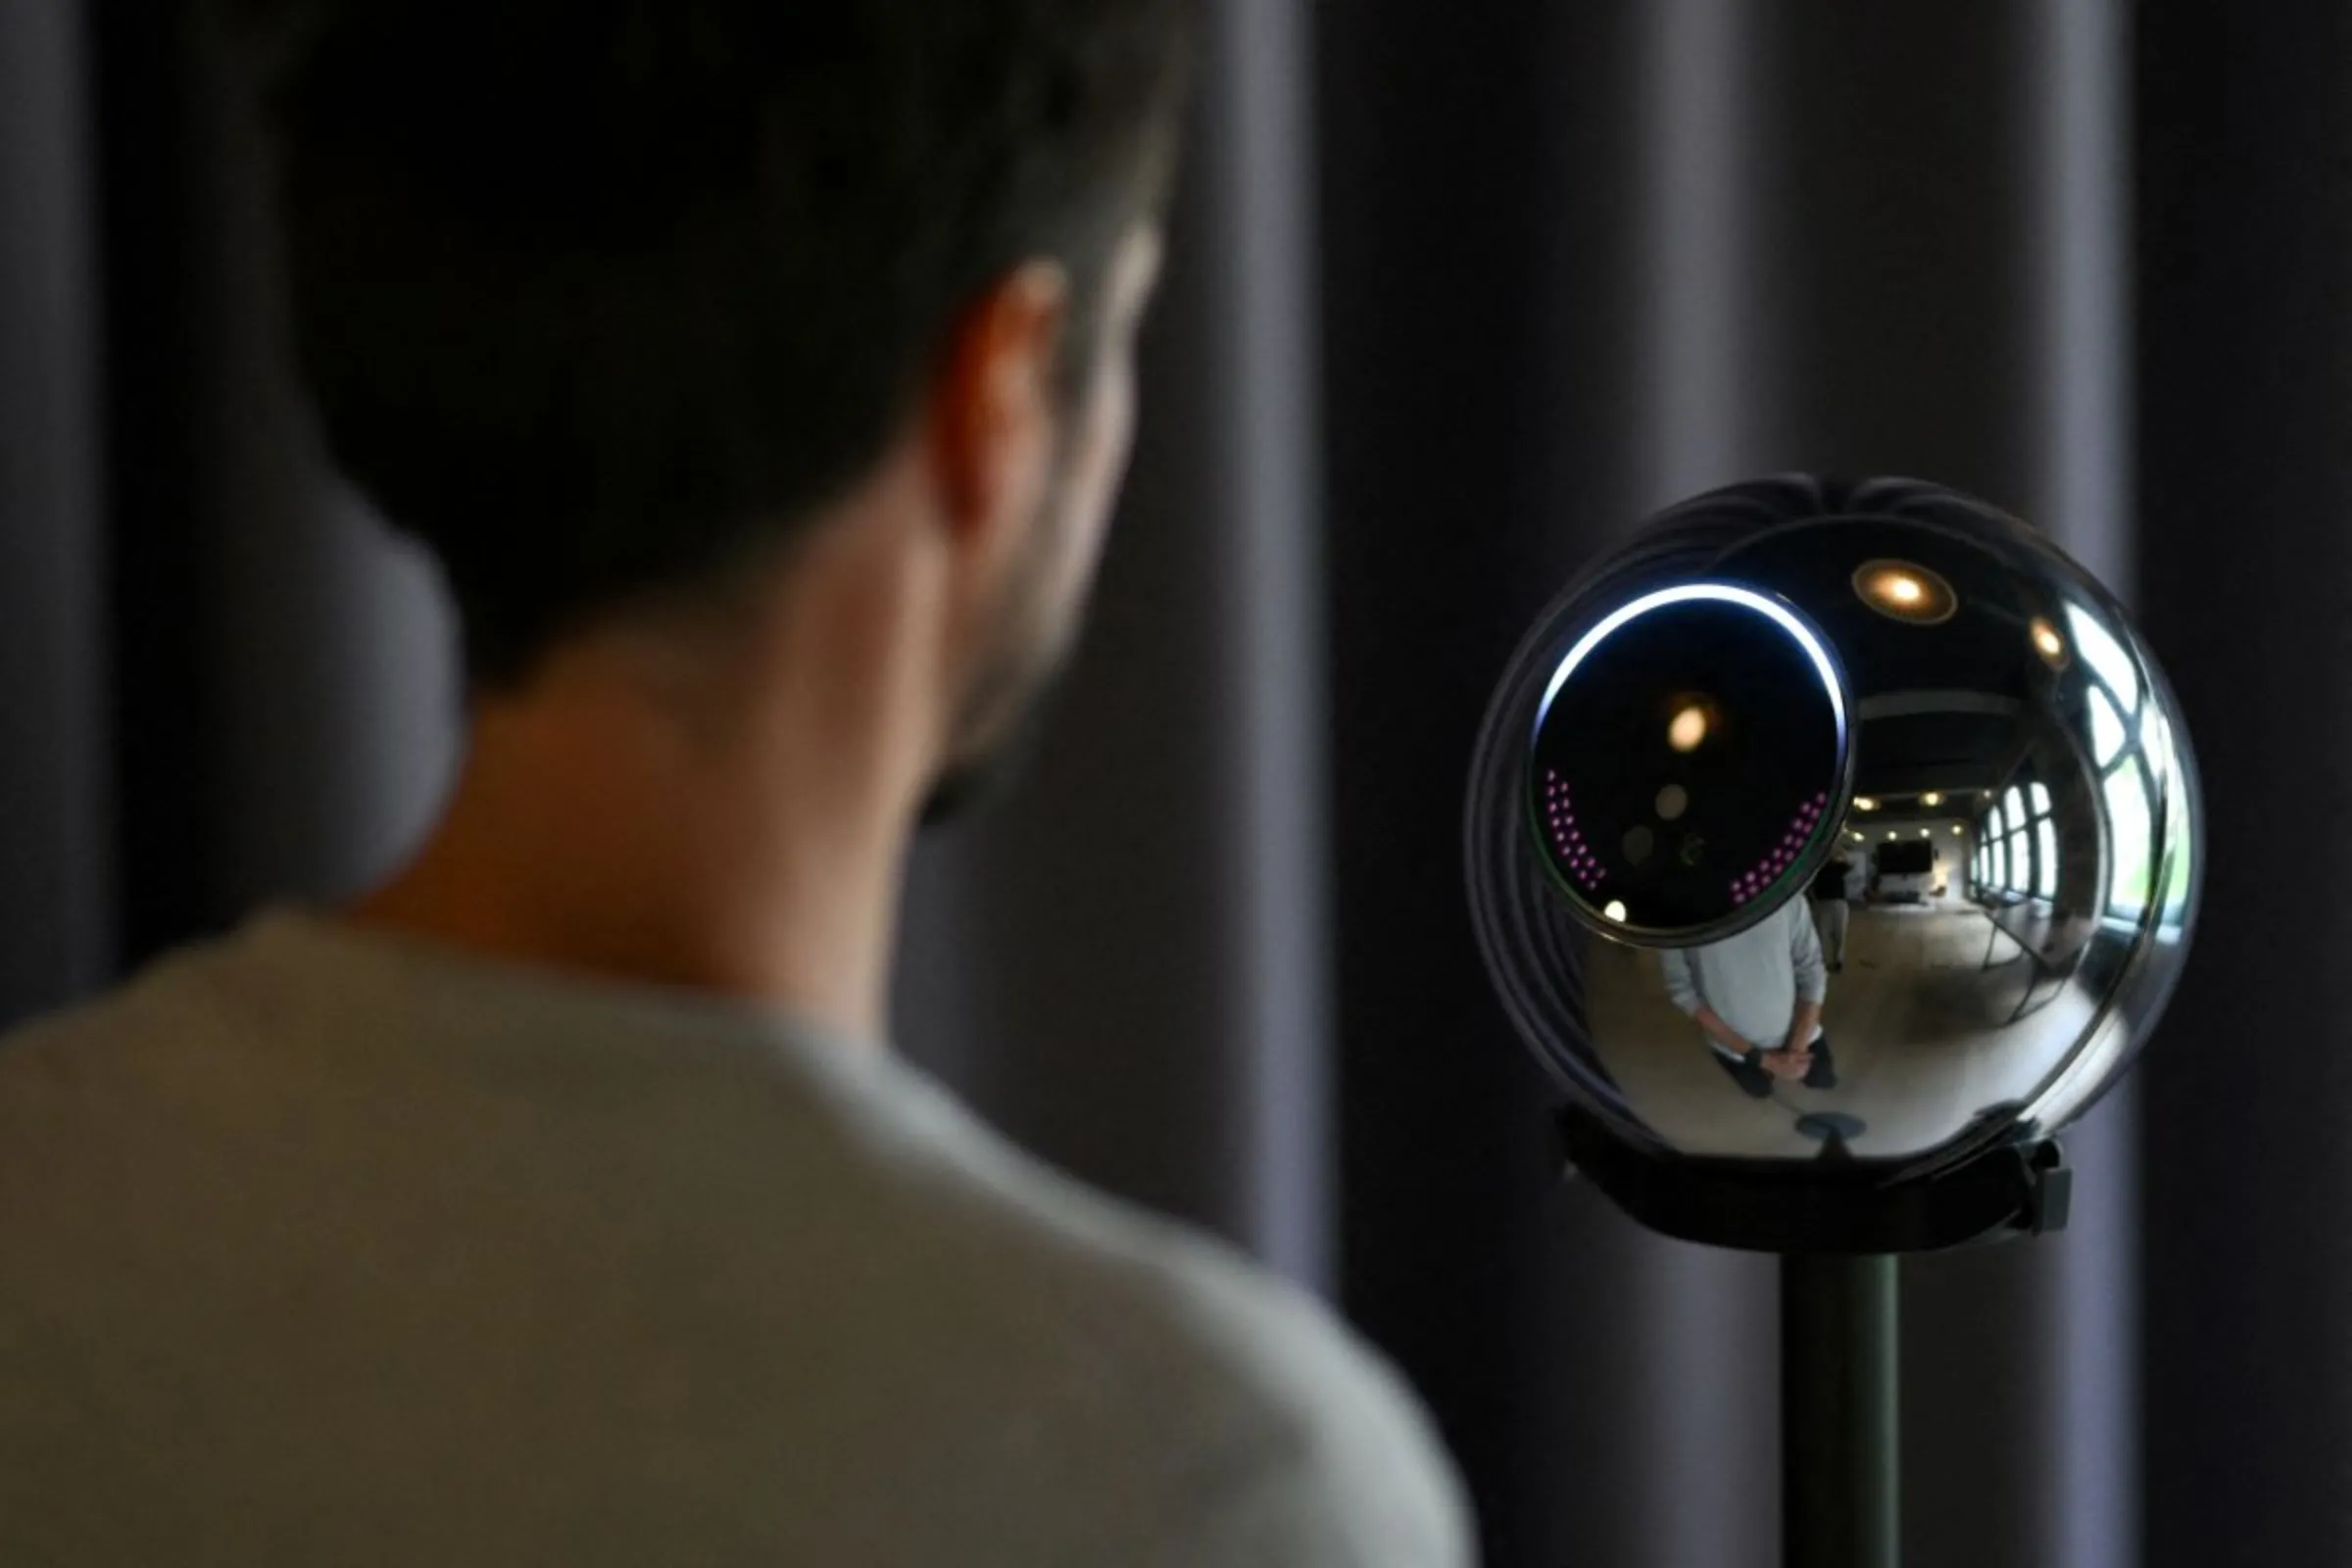 Ricardo Macieira, regional manager, Europe stands to simulate the iris scan near the biometric imaging device, the Orb of the identity and financial public utility Worldcoin, to create a World ID digital passport, being able to trade in cryptocurrency issued, in Berlin, Germany